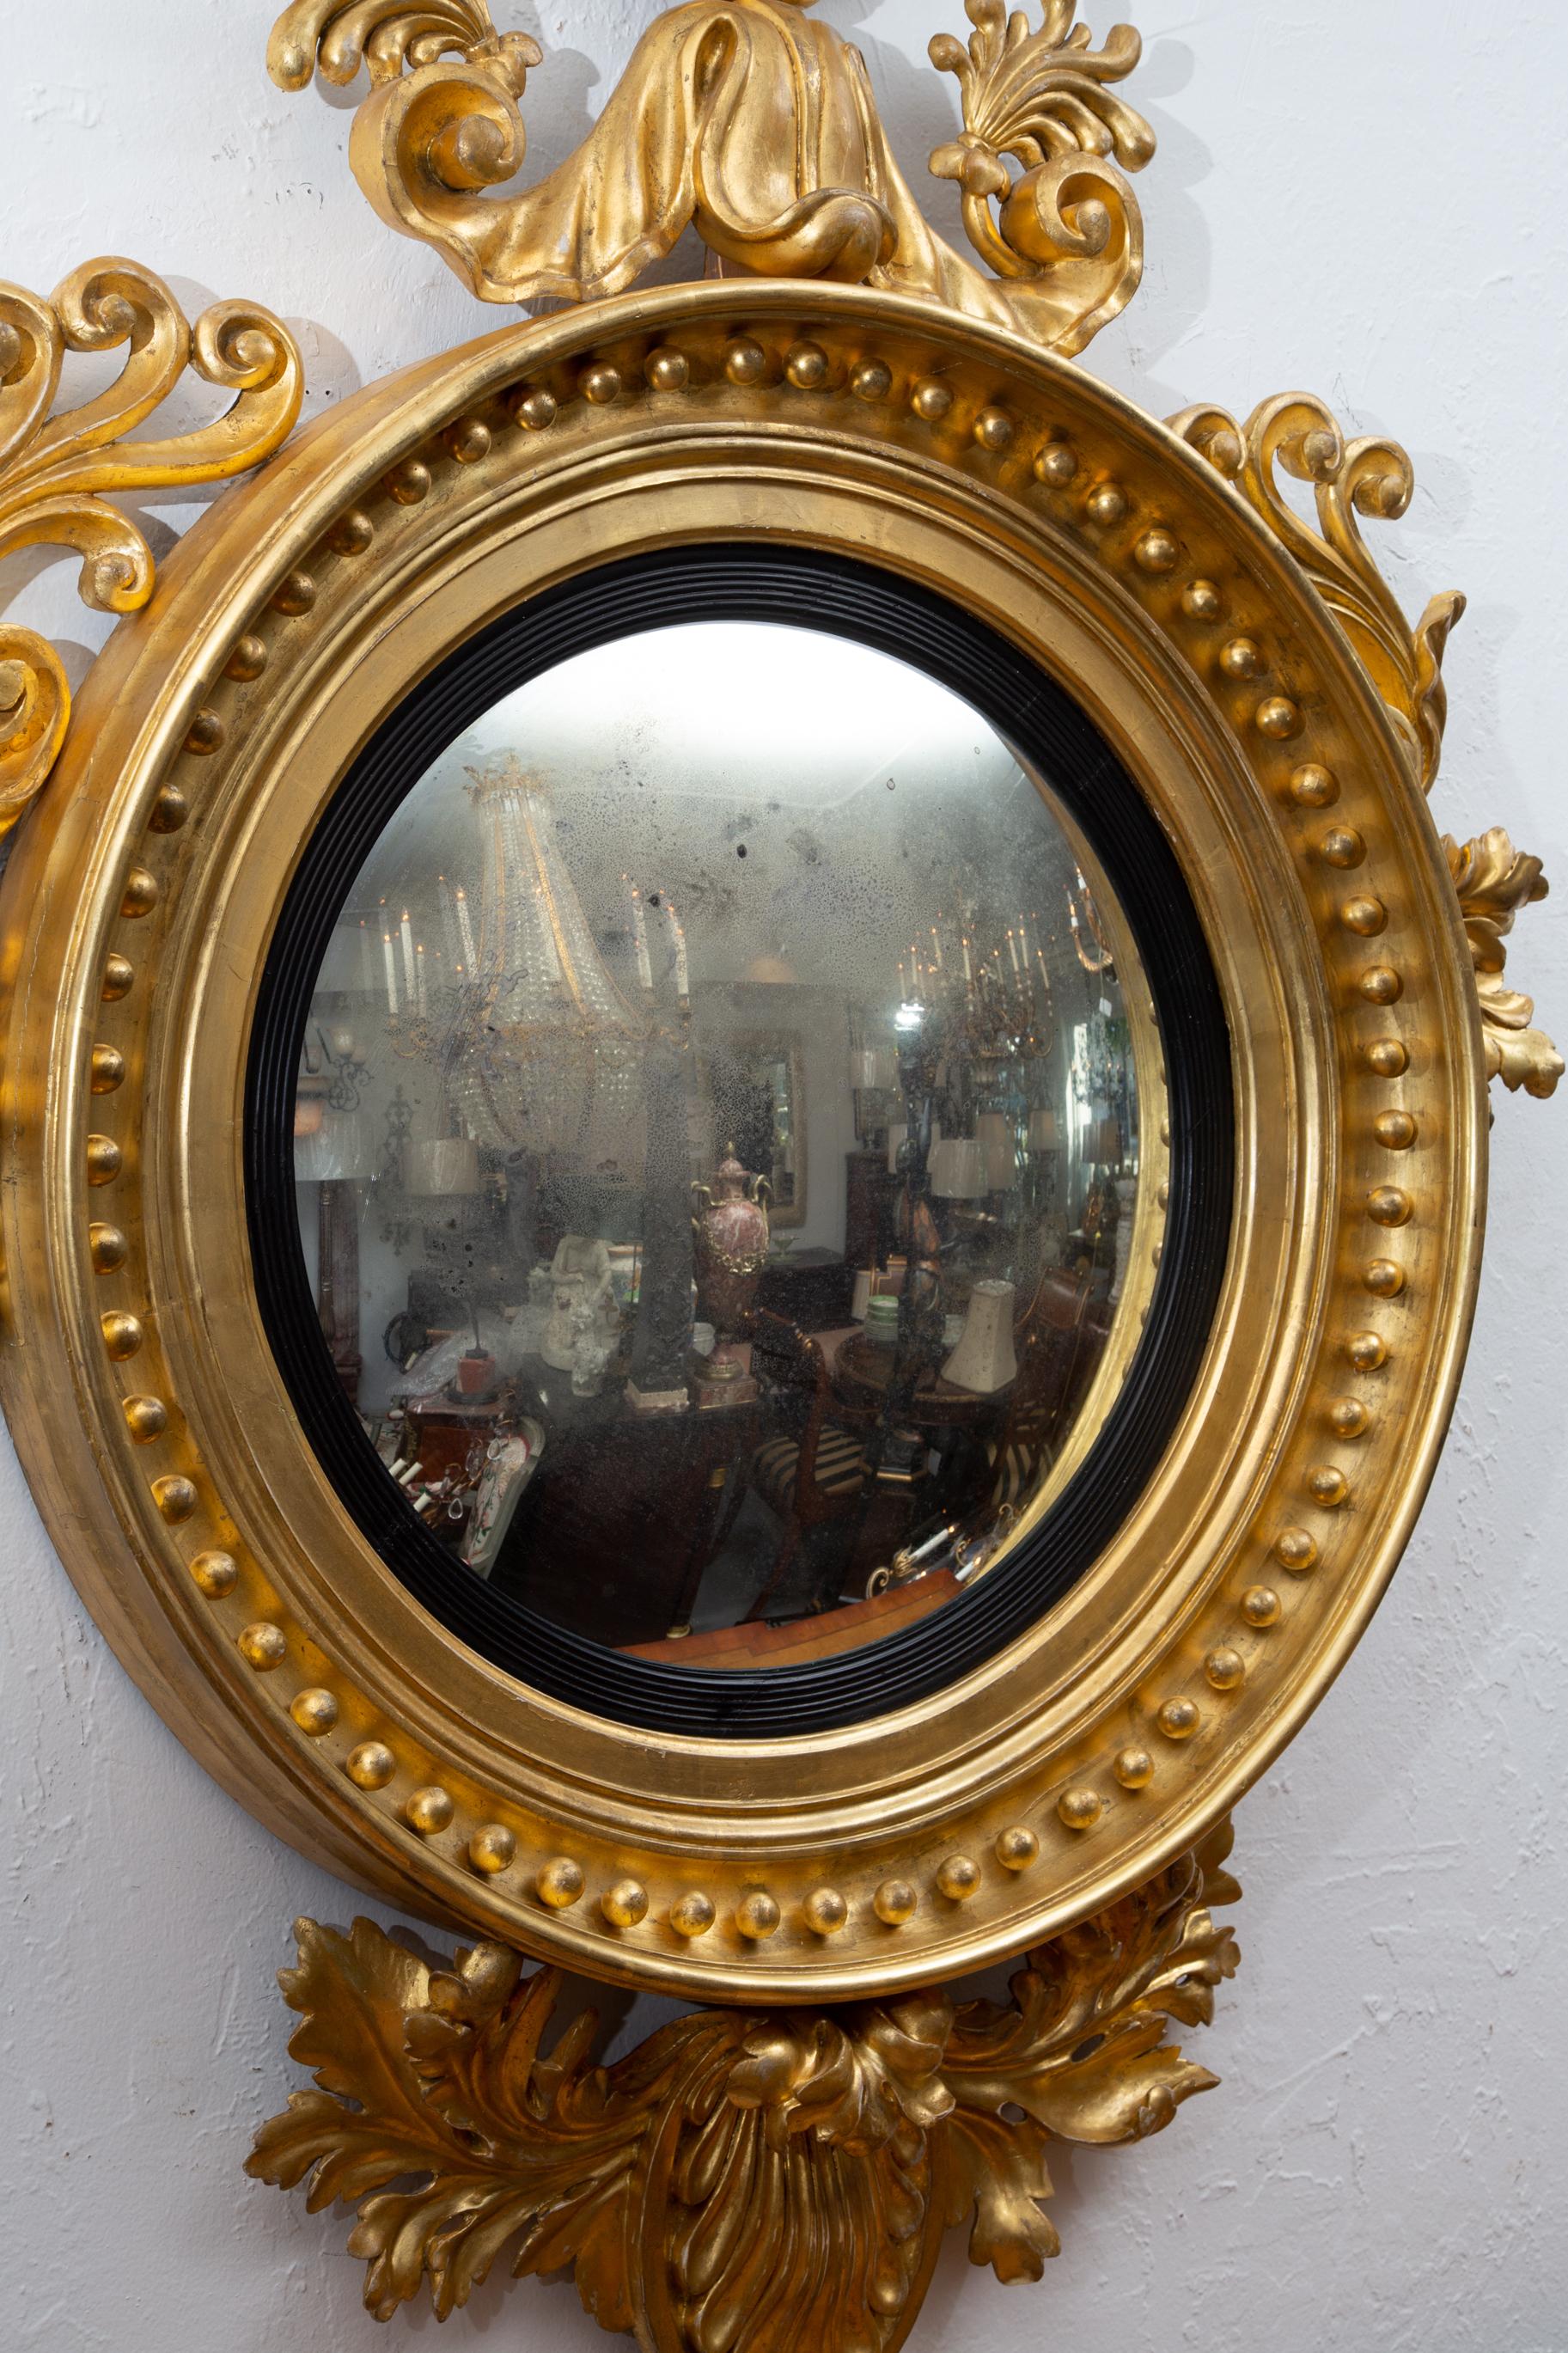 Continentinal Gilt Early 19th Century Wall Mirror For Sale 7